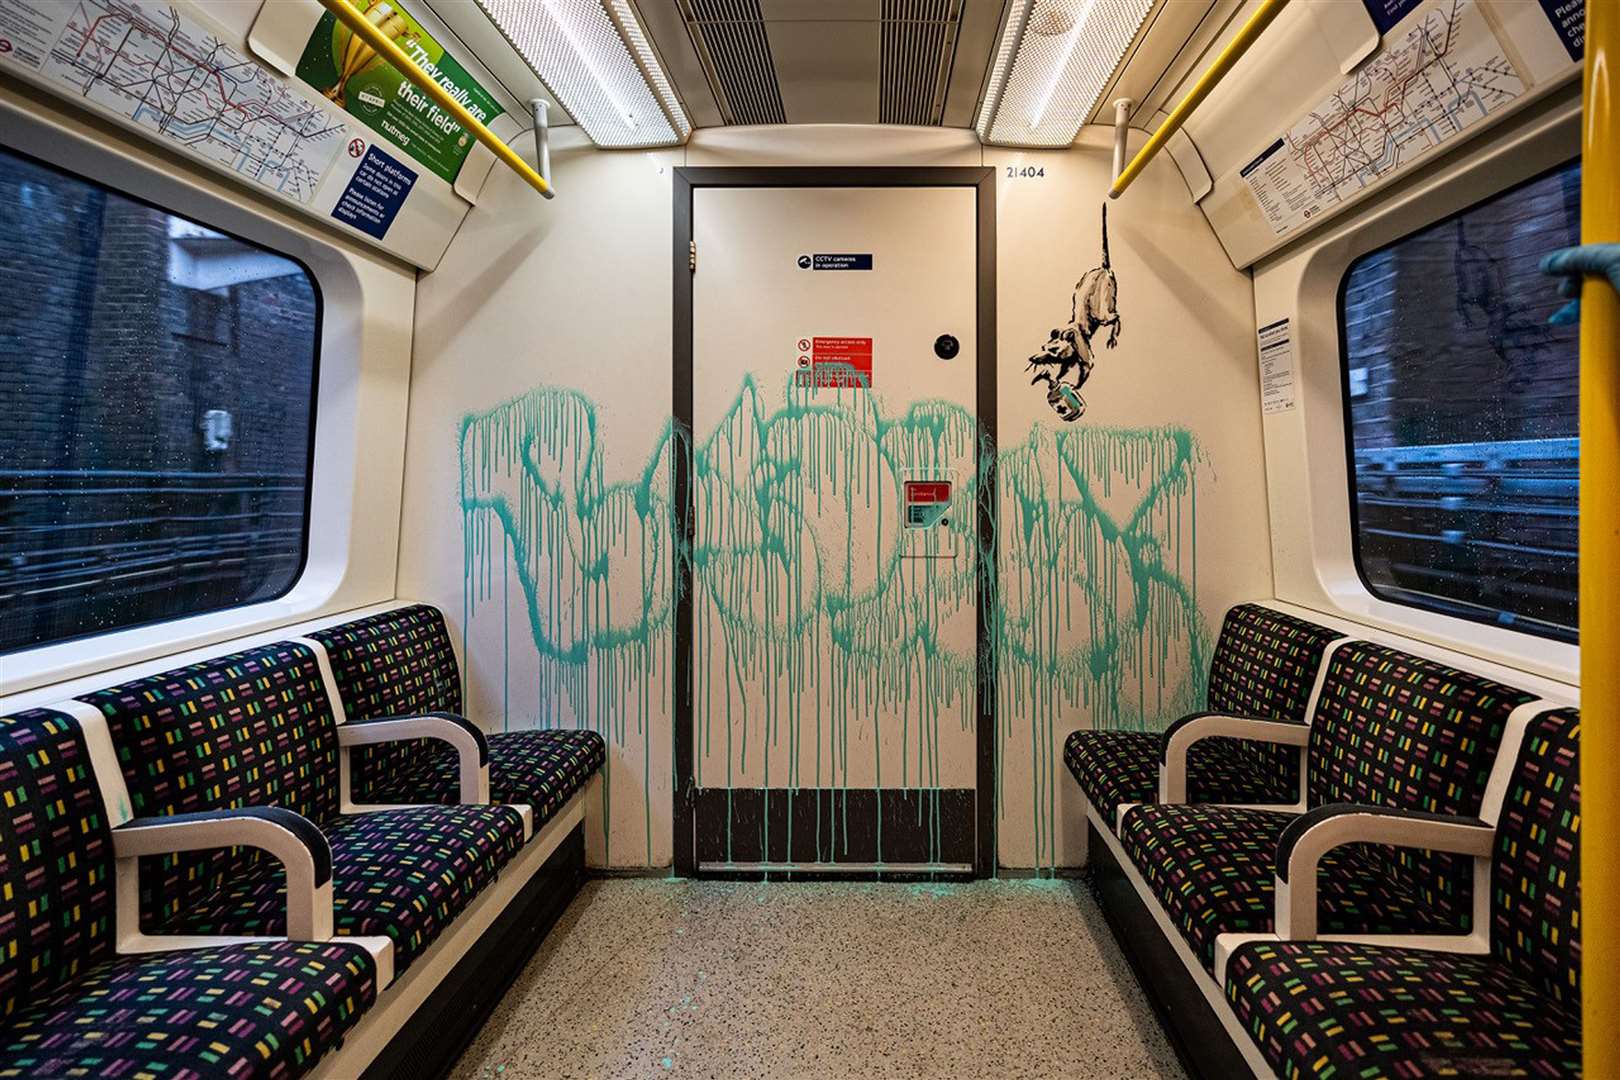 Banksy’s latest work on the inside of a London Underground carriage about the spread of coronavirus (@banksy)